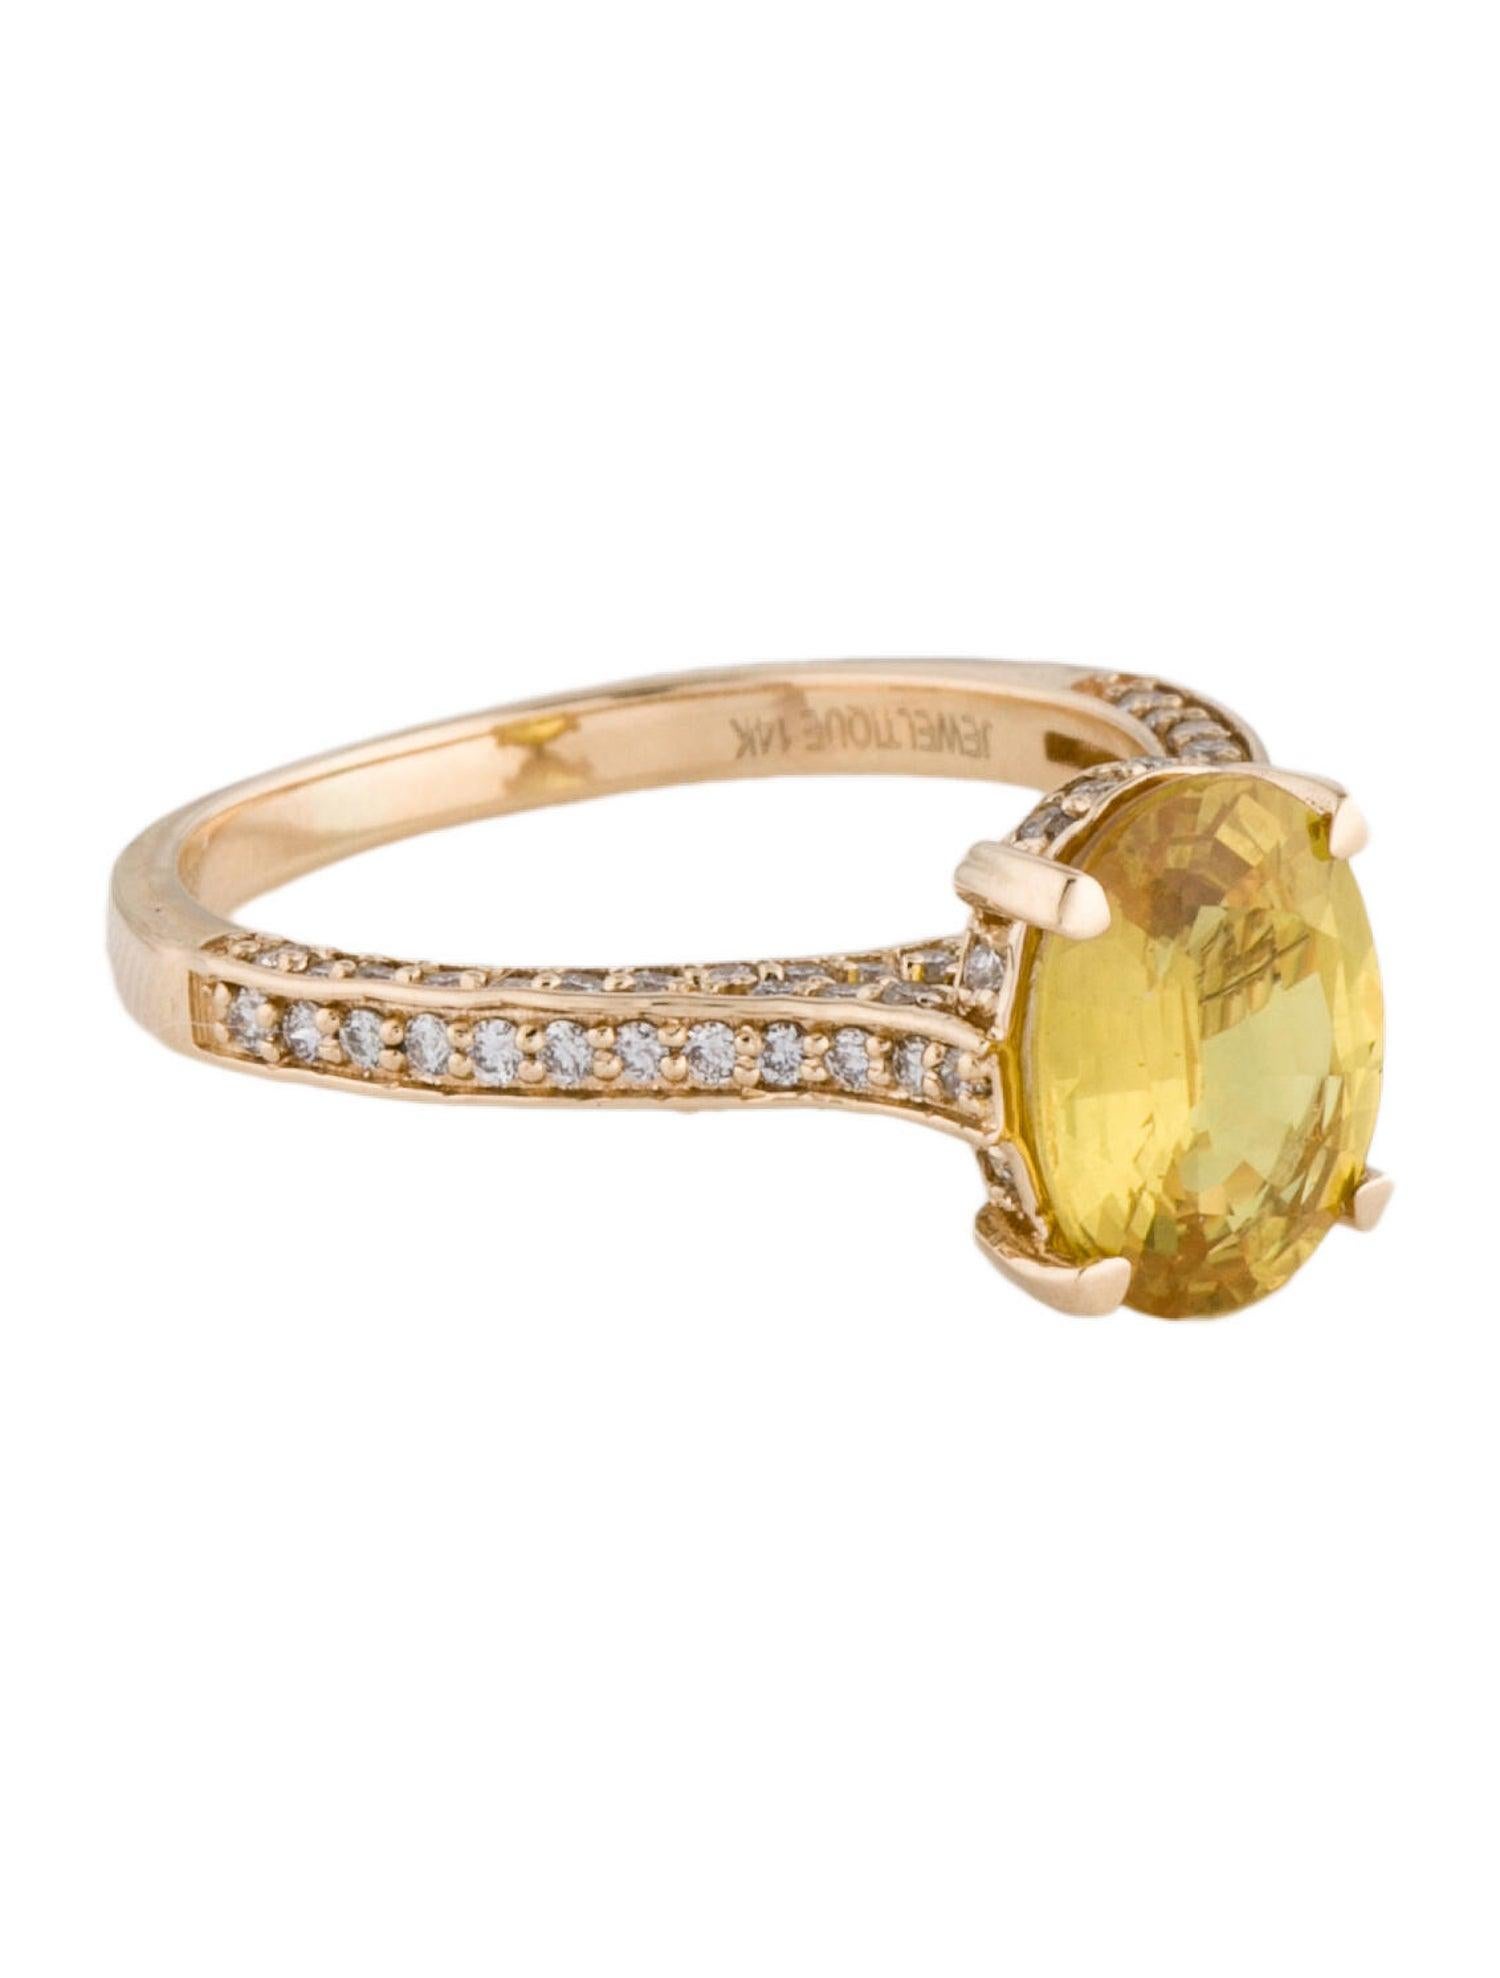 Elevate your style with our Rainbow Symphony Yellow Sapphire and Diamond Oval Ring from the distinguished Jeweltique collection. This exquisite piece encapsulates the vivid spectrum of a rainbow, celebrating the natural beauty and harmony found in